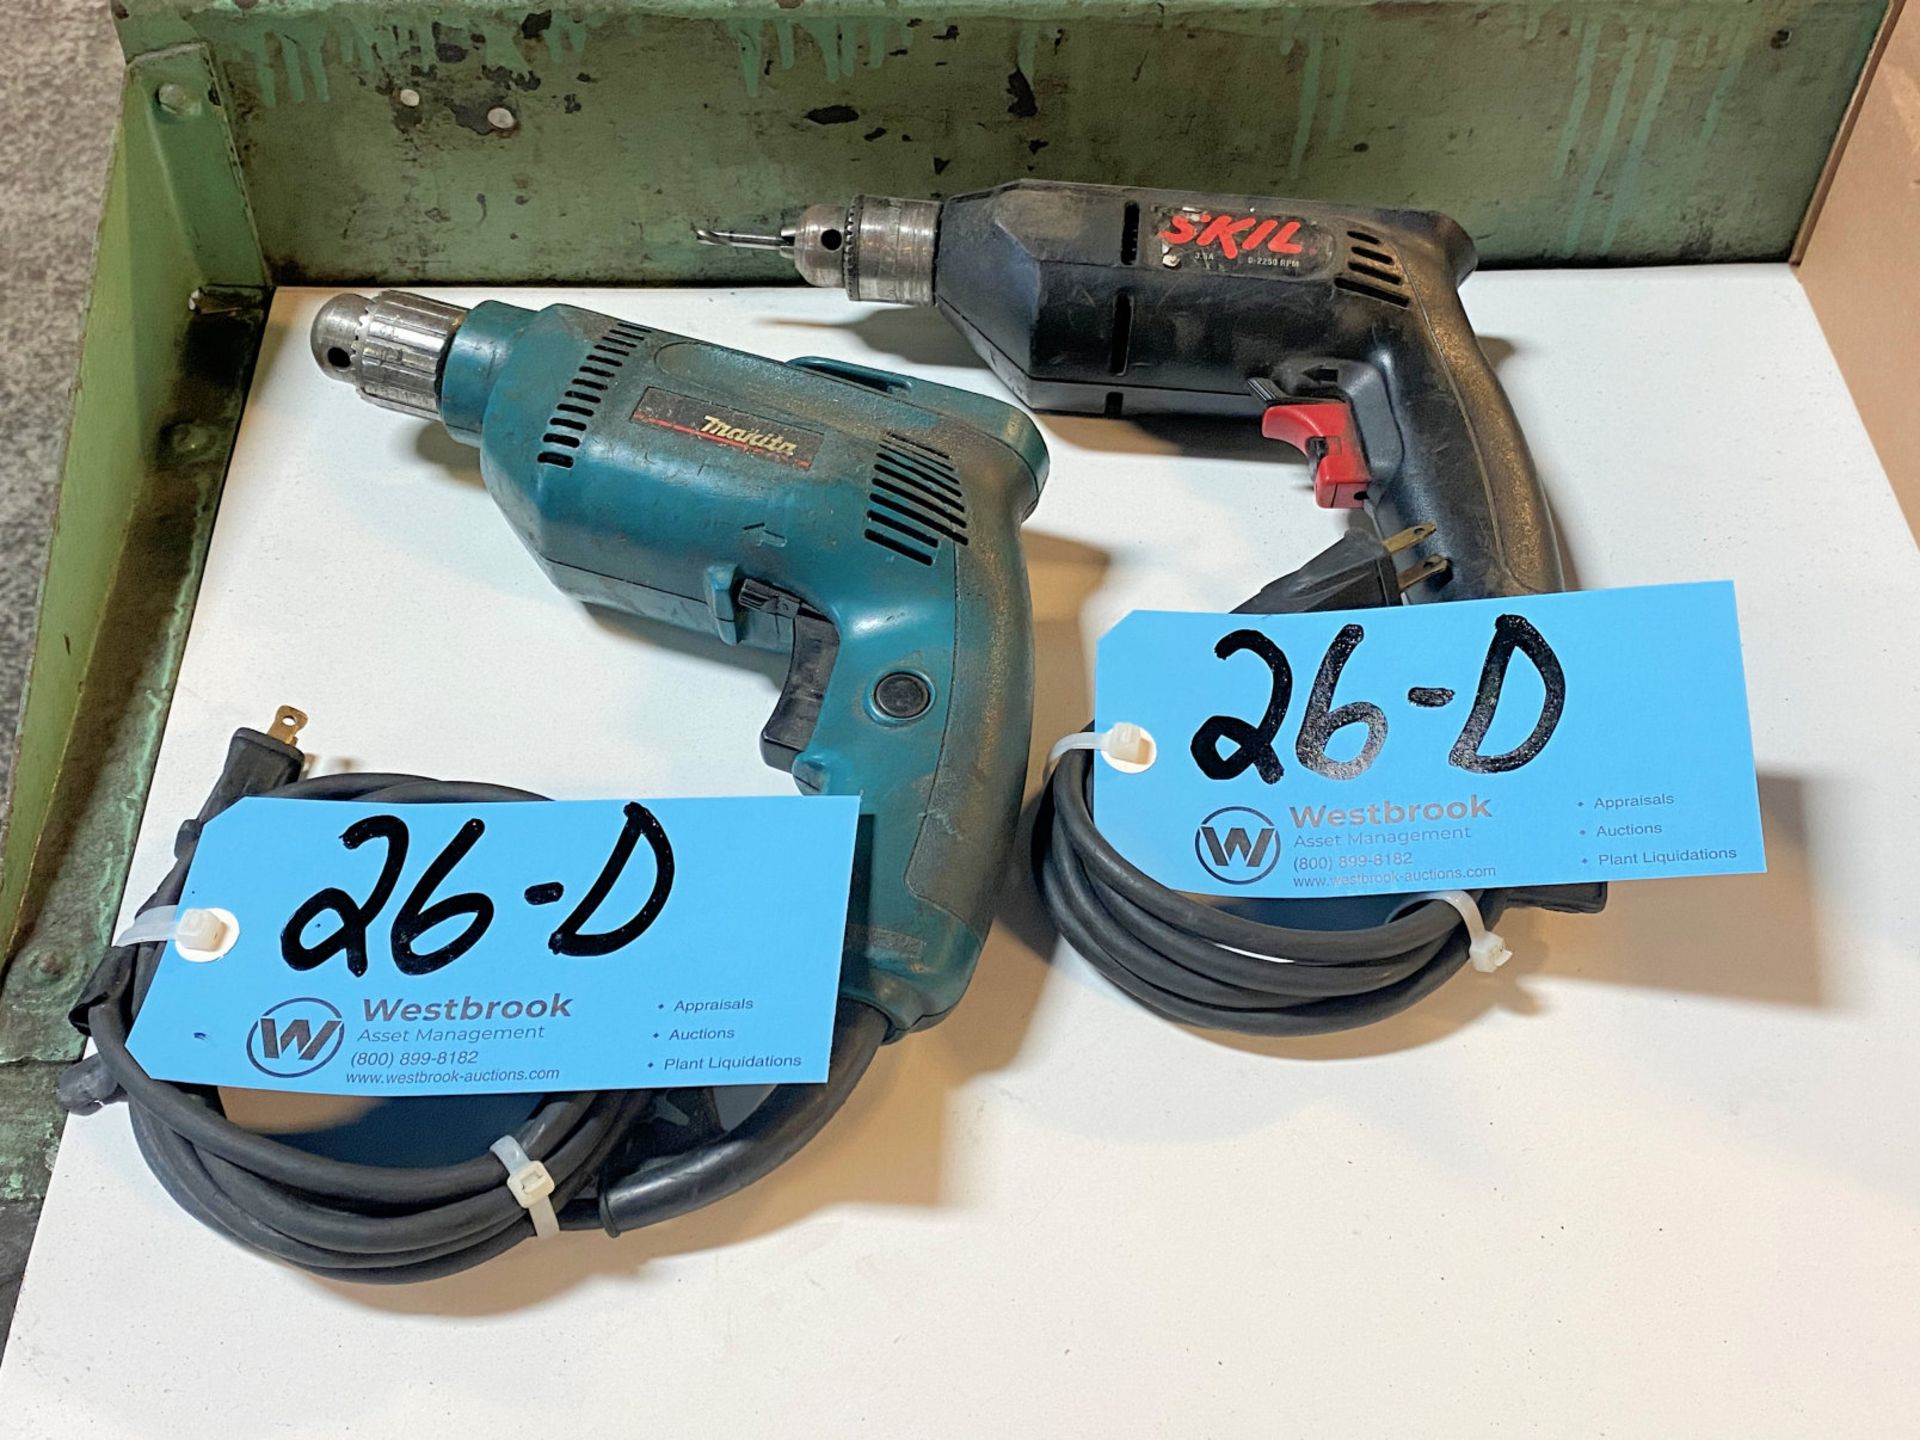 Lot-(1) Skil Model 6215, 3/8" Electric Drill, and (1) Makita 3/8" Electric Drill